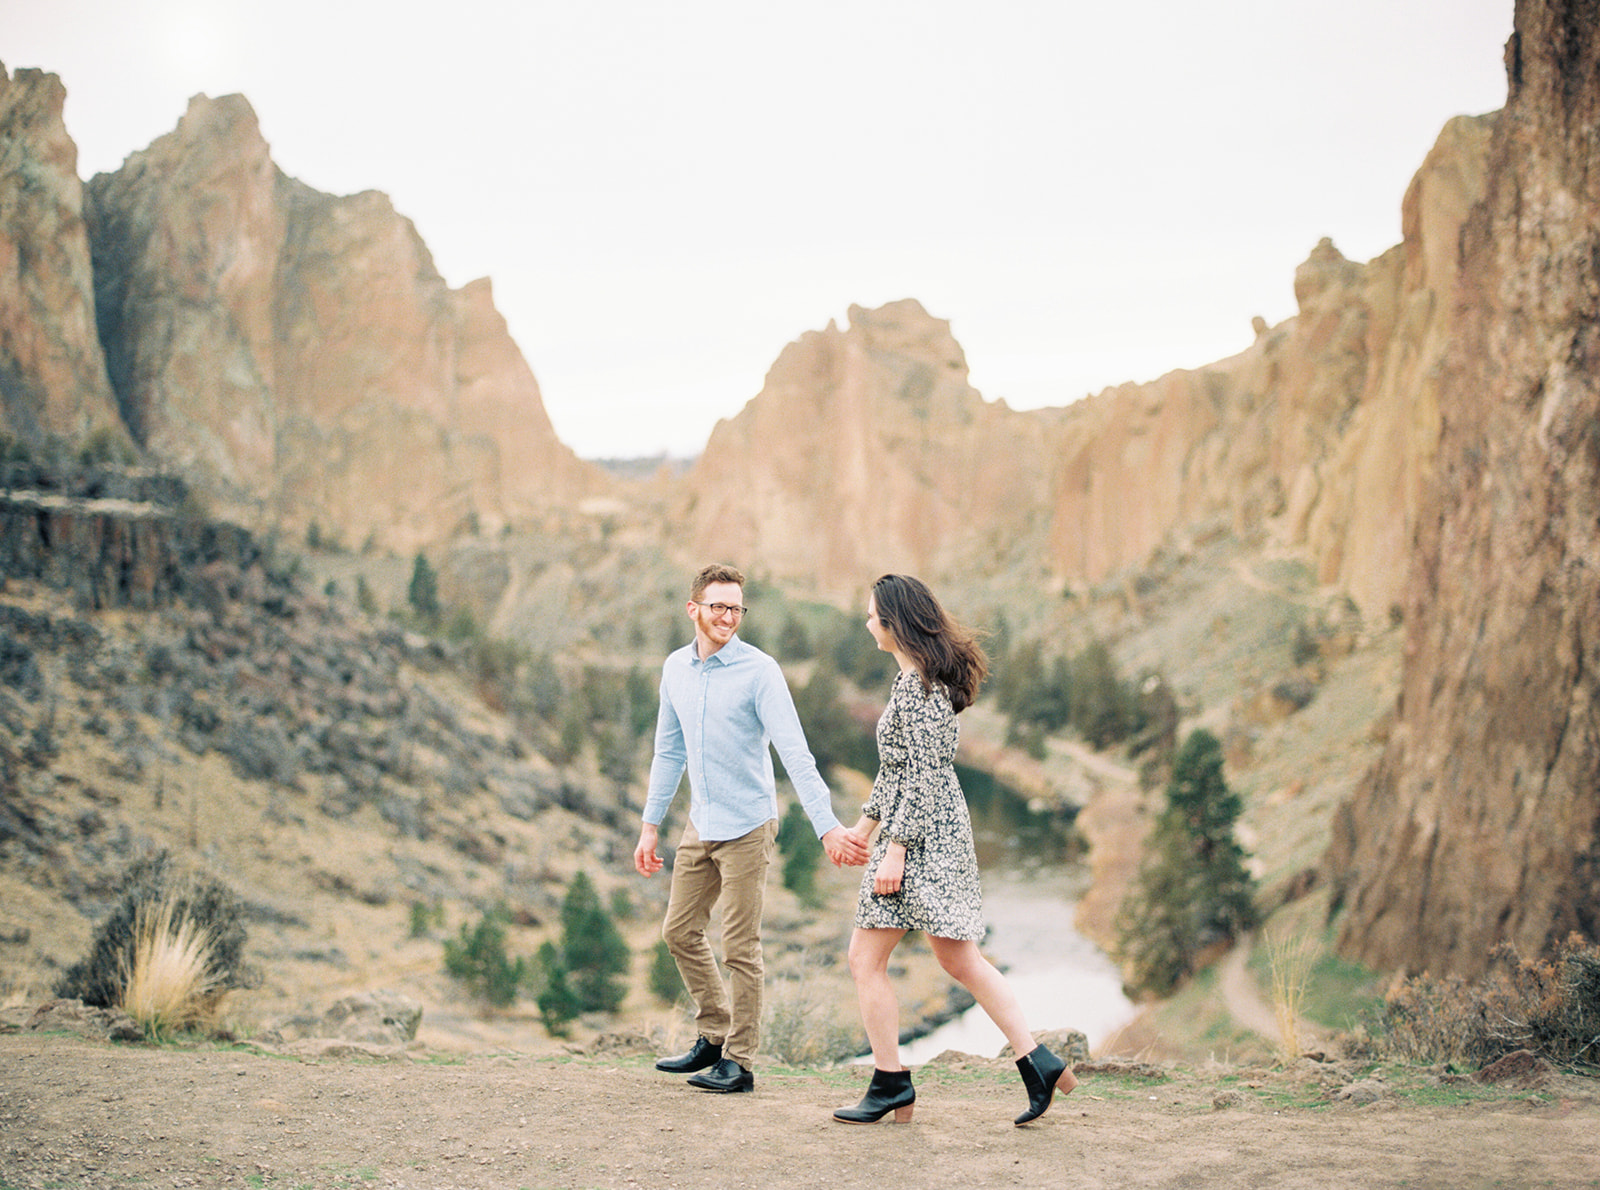 A couple enjoys their walk while dressed up for engagement photos in Bend, Oregon